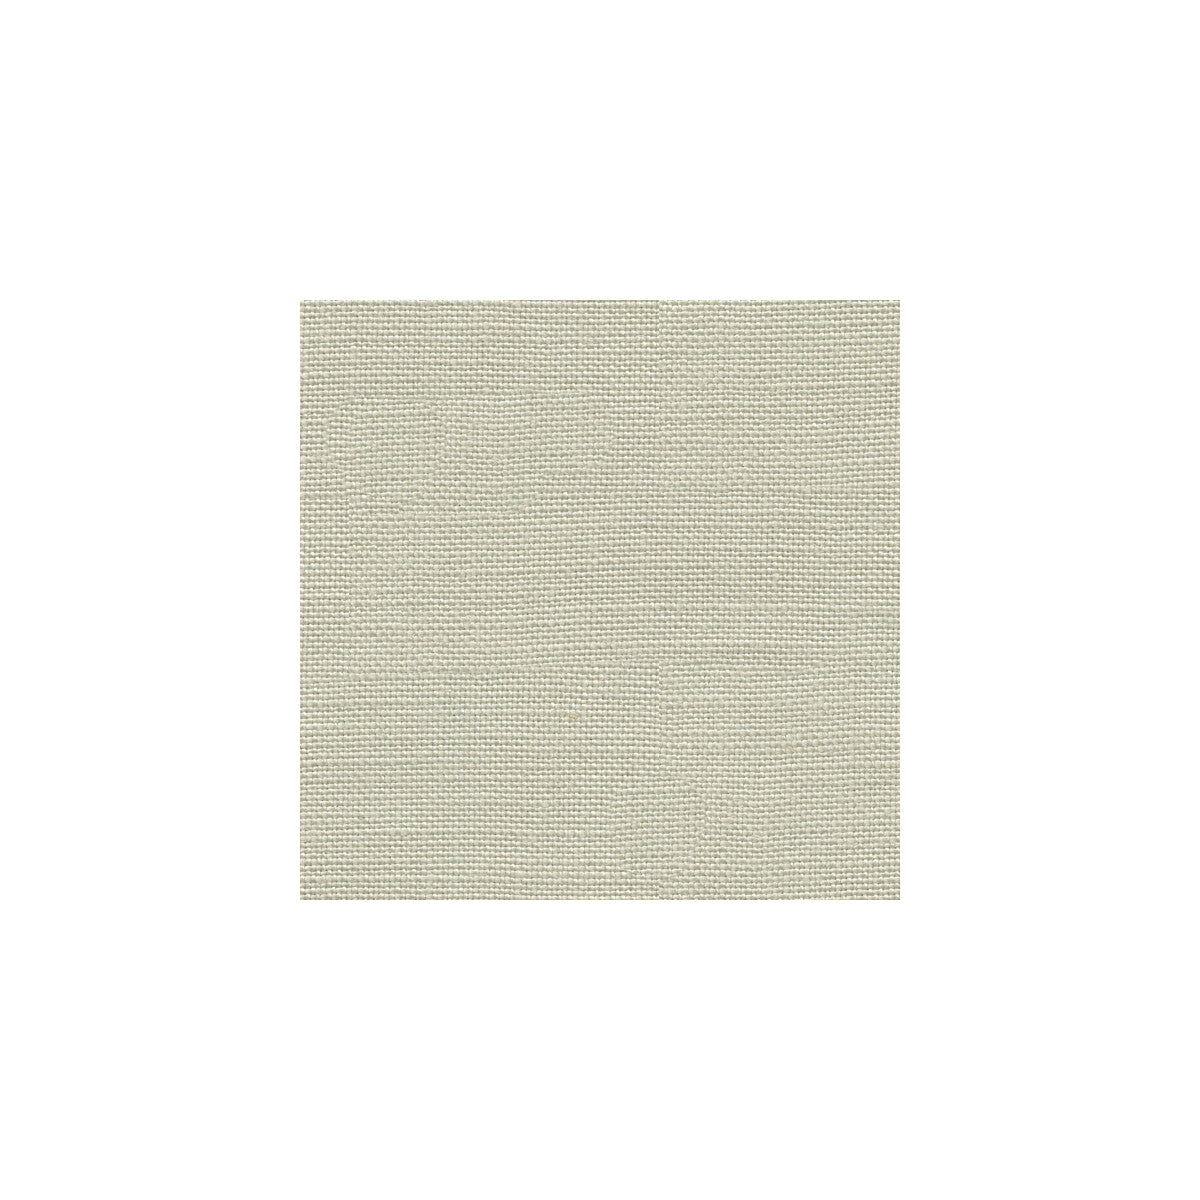 Madison Linen fabric in mist color - pattern 32330.123.0 - by Kravet Design in the Gis collection